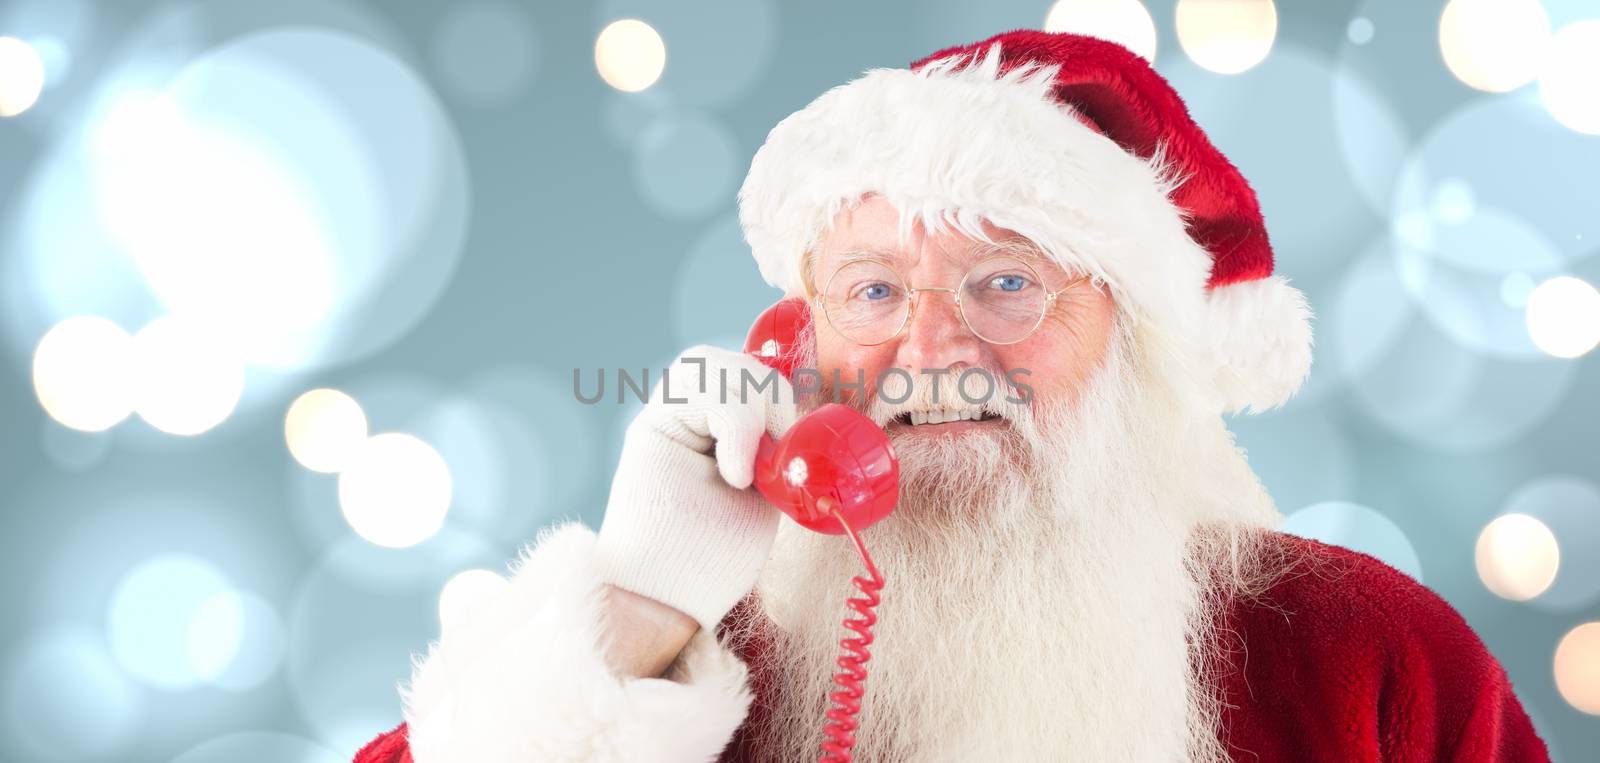 Composite image of santa claus on the phone by Wavebreakmedia